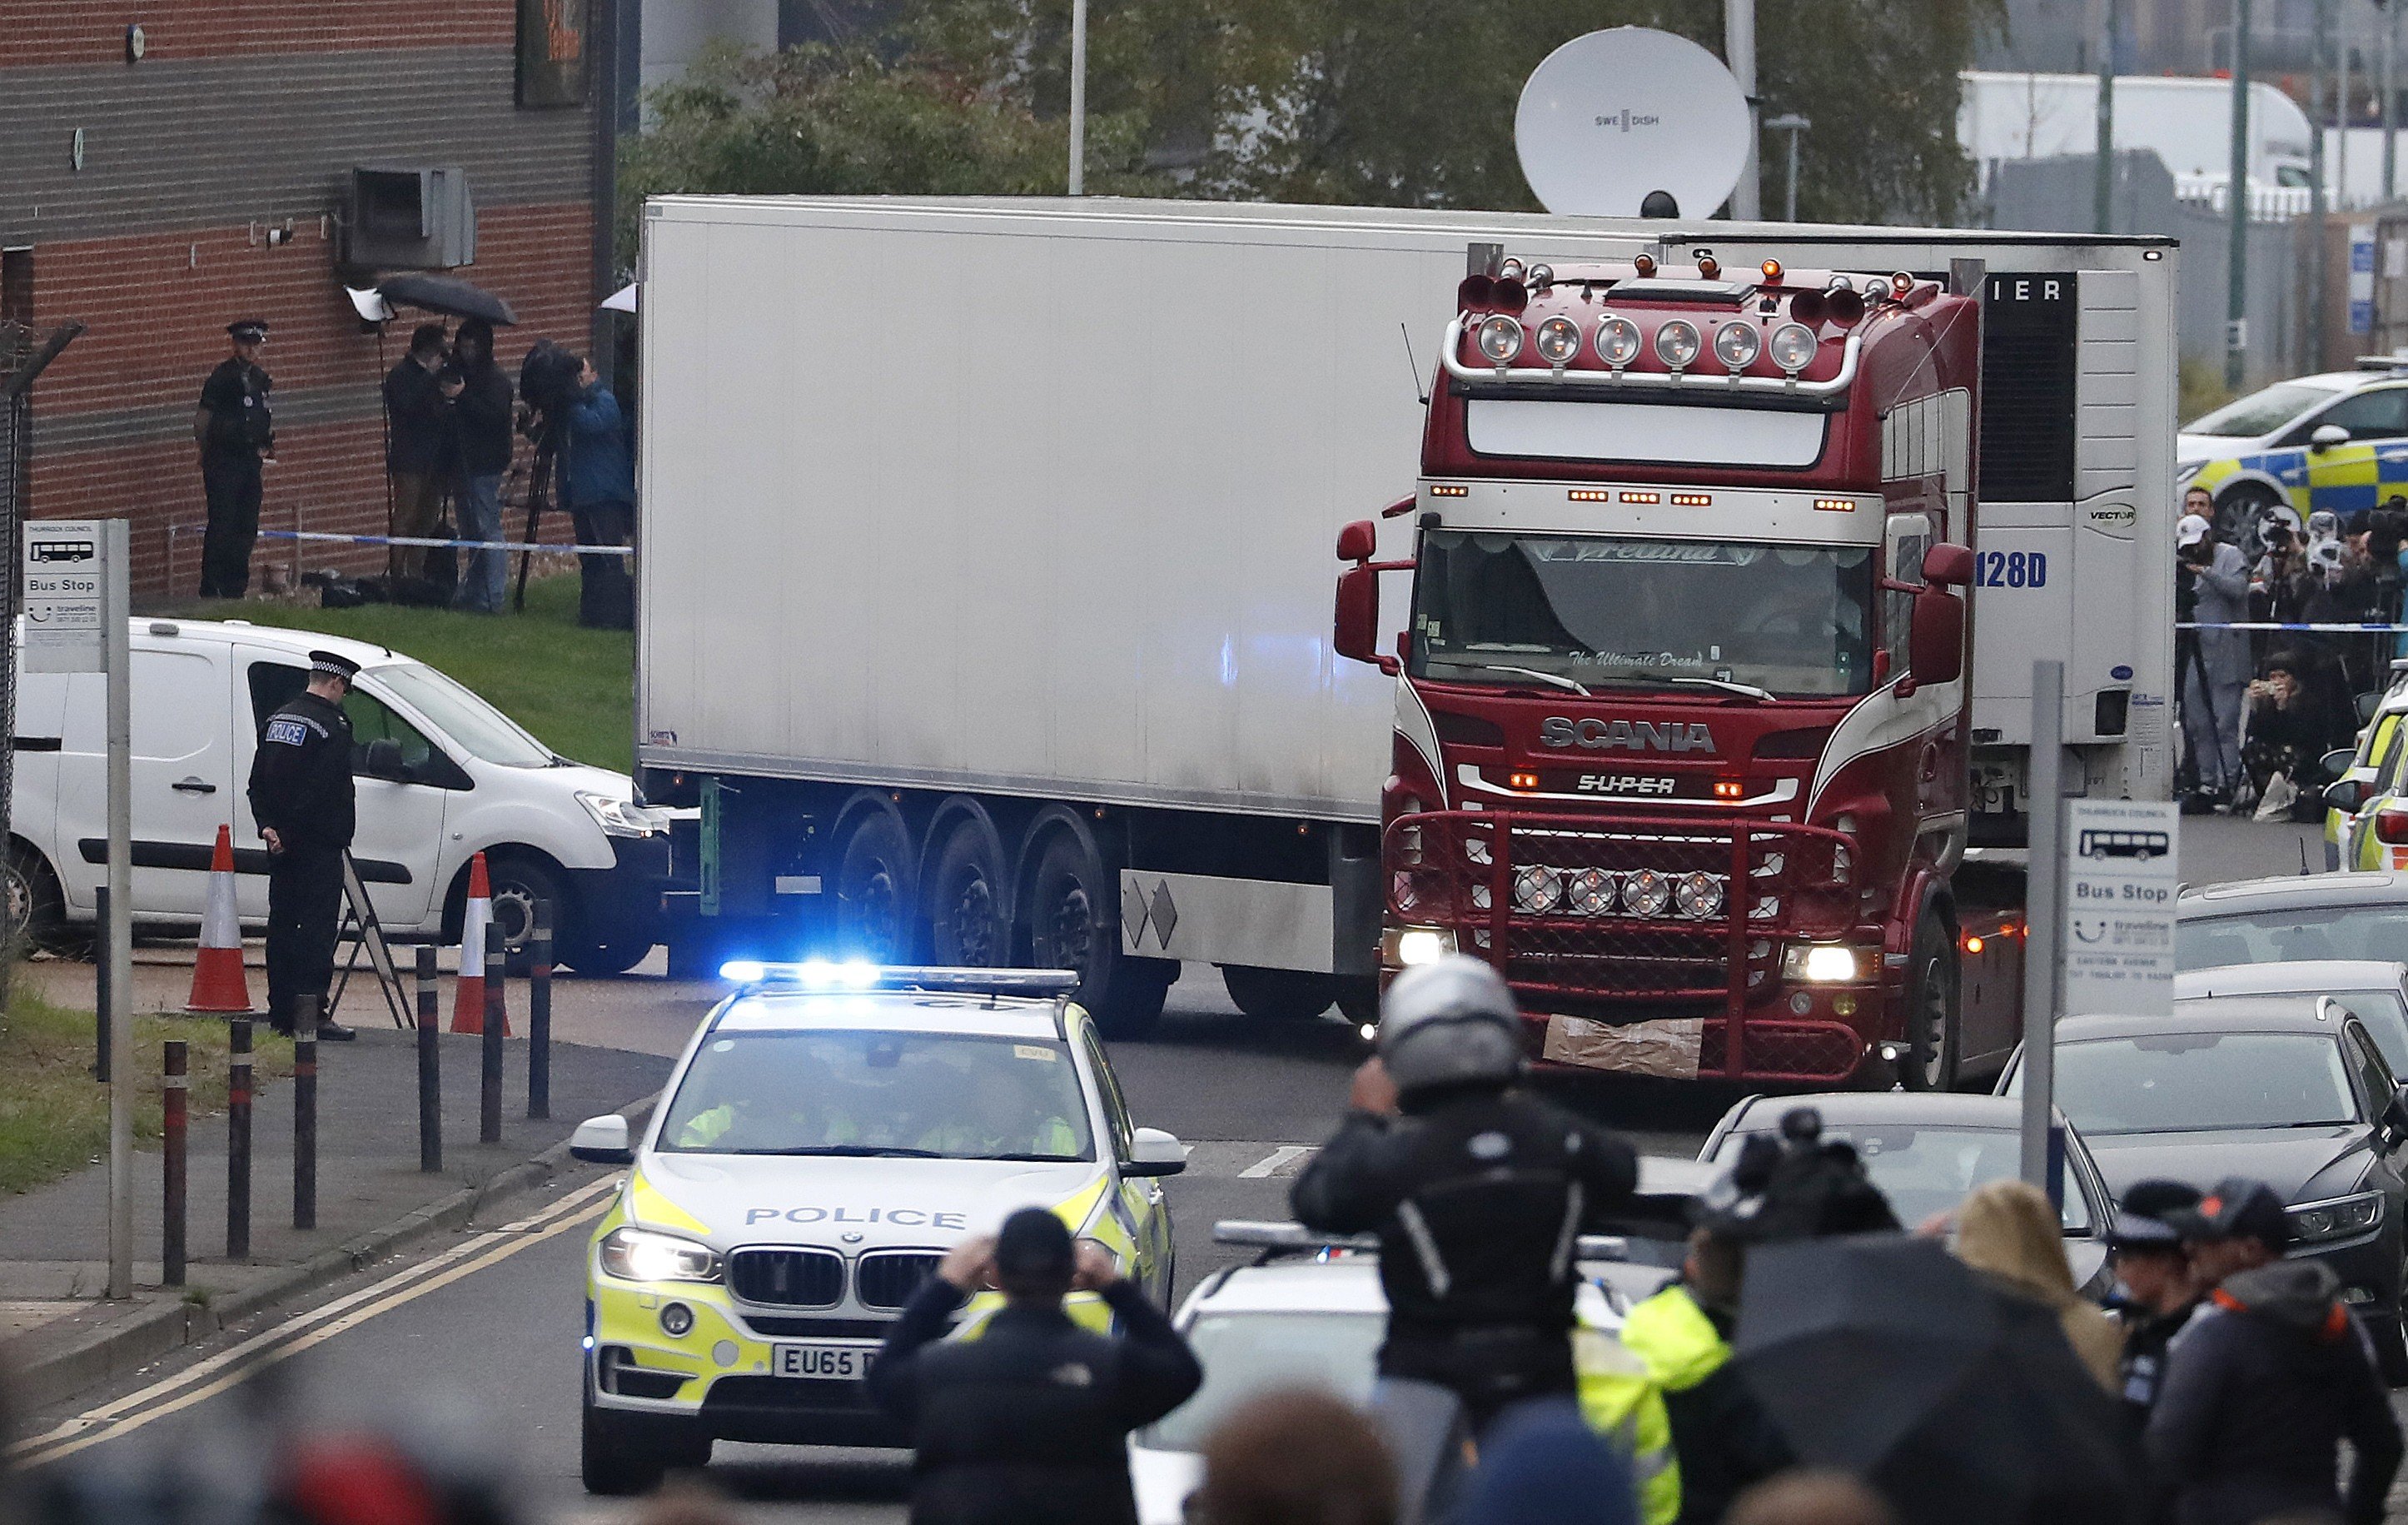 The truck that was found to contain 39 dead bodies. Photo: AP